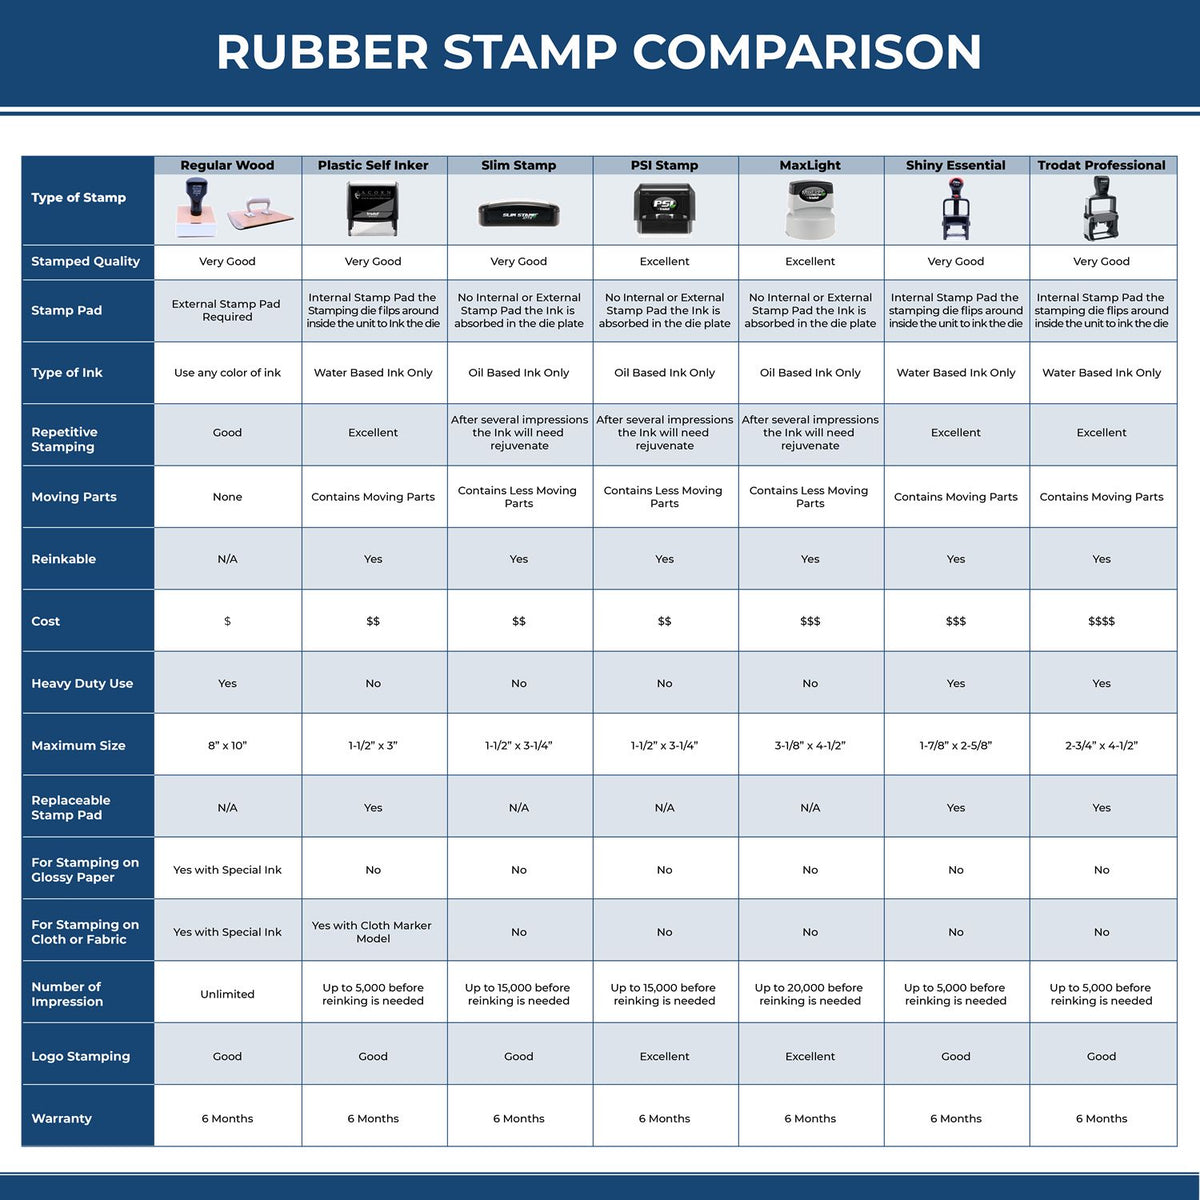 A comparison chart for the different types of mount models available for the Heavy-Duty Illinois Rectangular Notary Stamp.